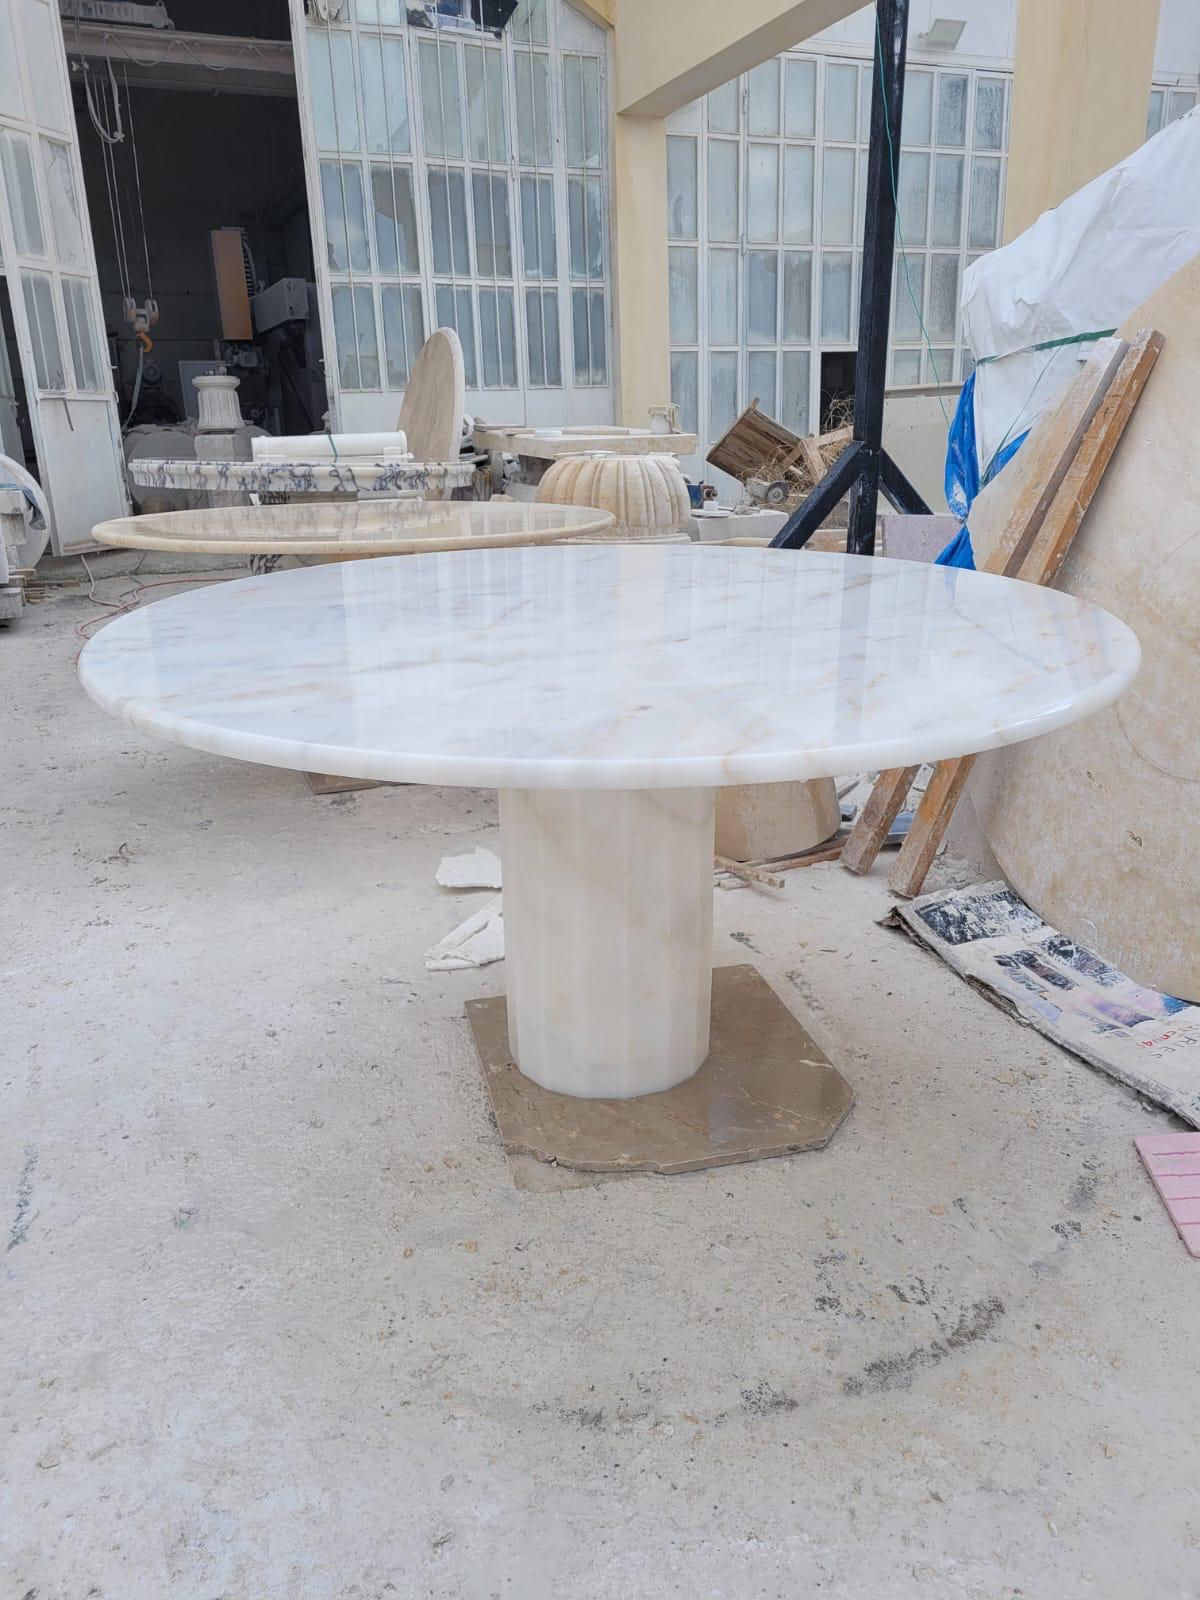 This Minimalist table is made from white marble, featuring a hexagon shaped foot and a circular travertine tabletop that balances perfectly and securely with its own weight. 

Functional piece with space for leg room.

Not all Marble is created